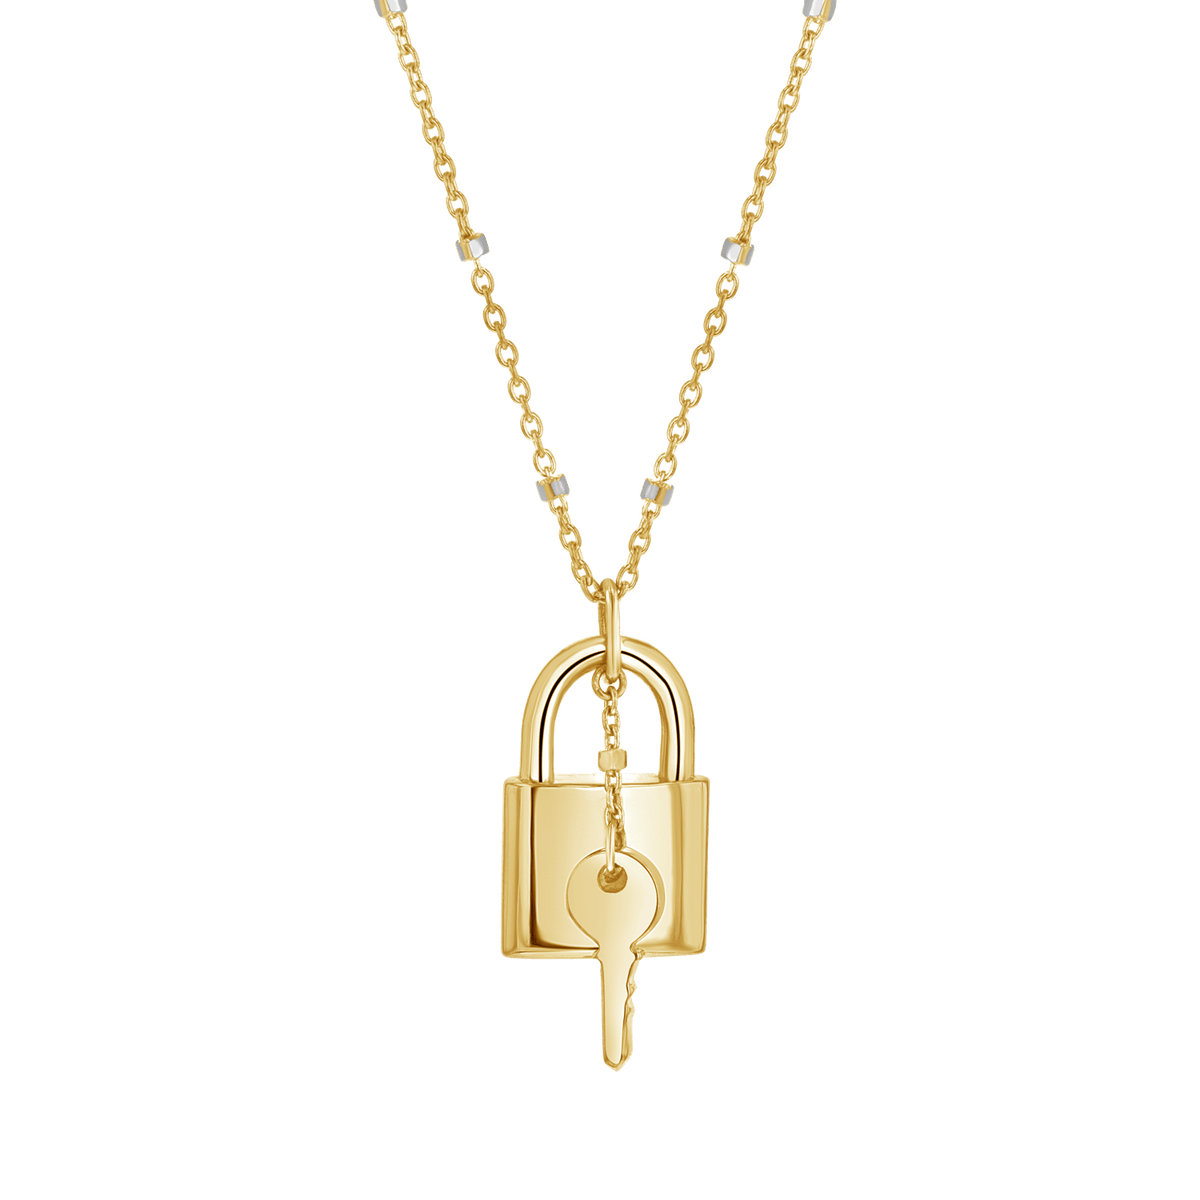 Chain Necklace Padlock Pendant, Chain Link Necklace Lock